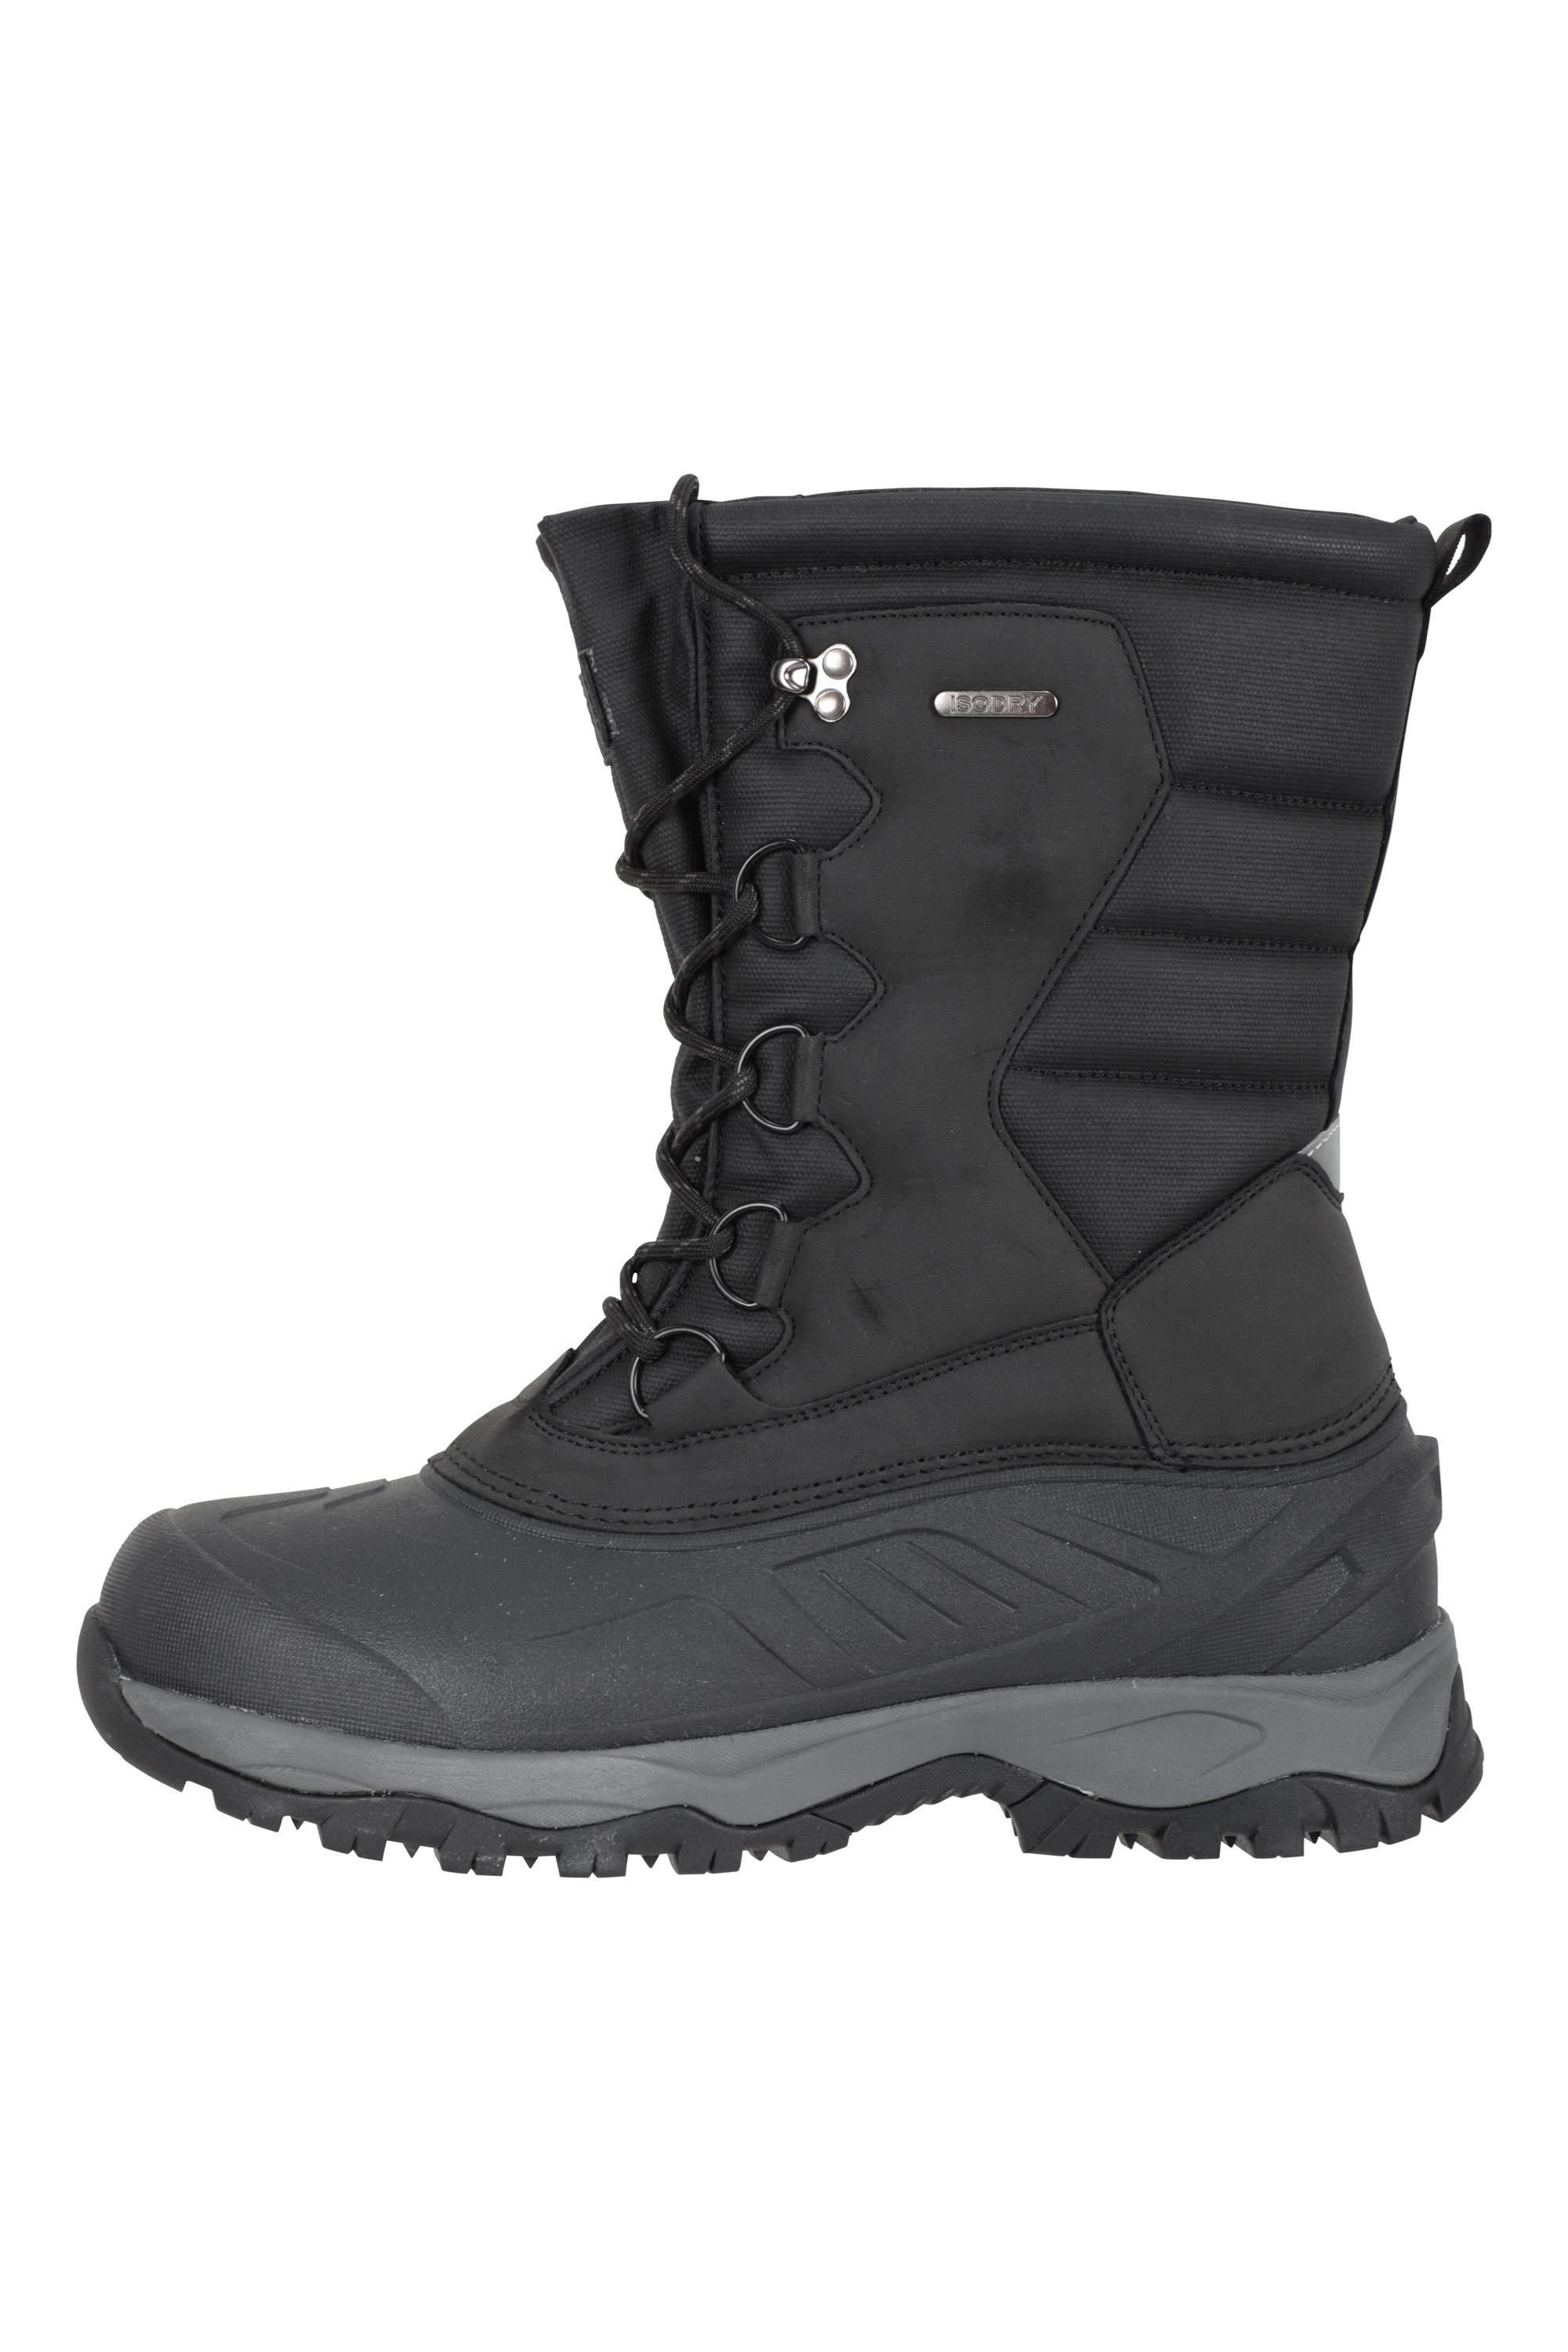 042787 NEVIS EXTREME THERMAL WATERPROOF SNOW BOOT